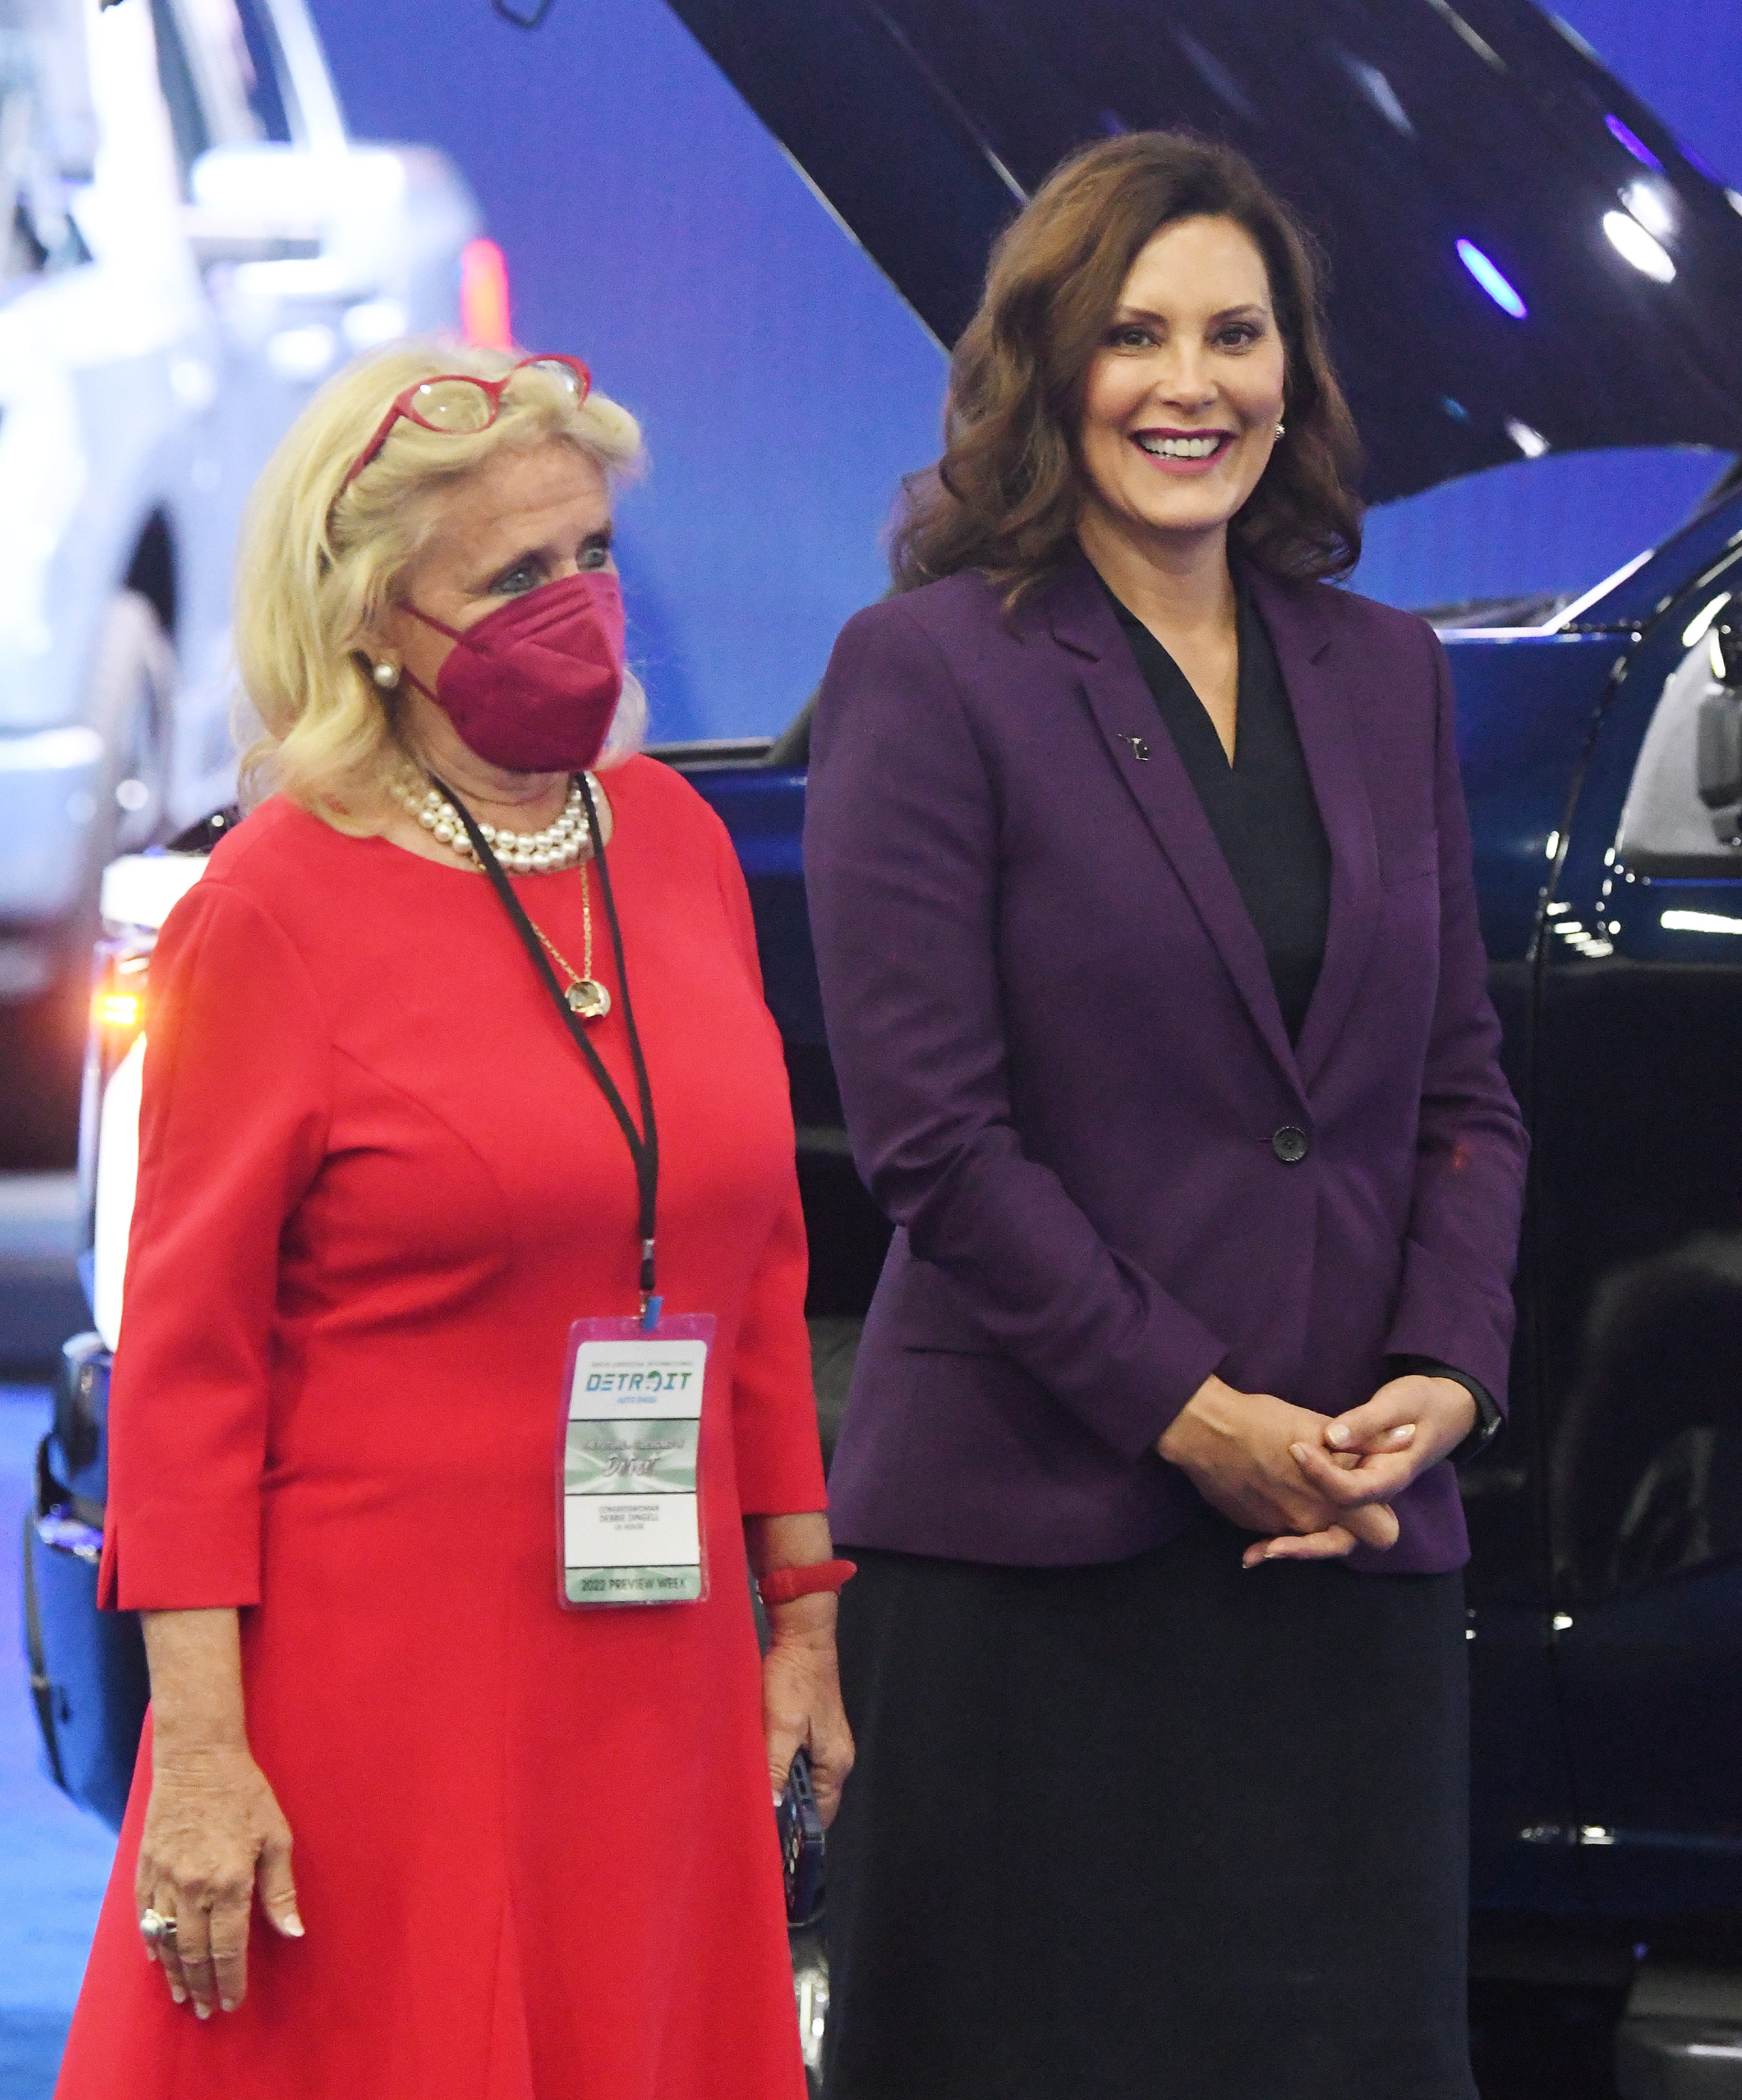 U.S. Representative Debbie Dingell and Michigan Governor Gretchen Whitmer during a tour with President Joe Biden at the 2022 North American International Auto Show in Detroit, Michigan on September 14, 2022.